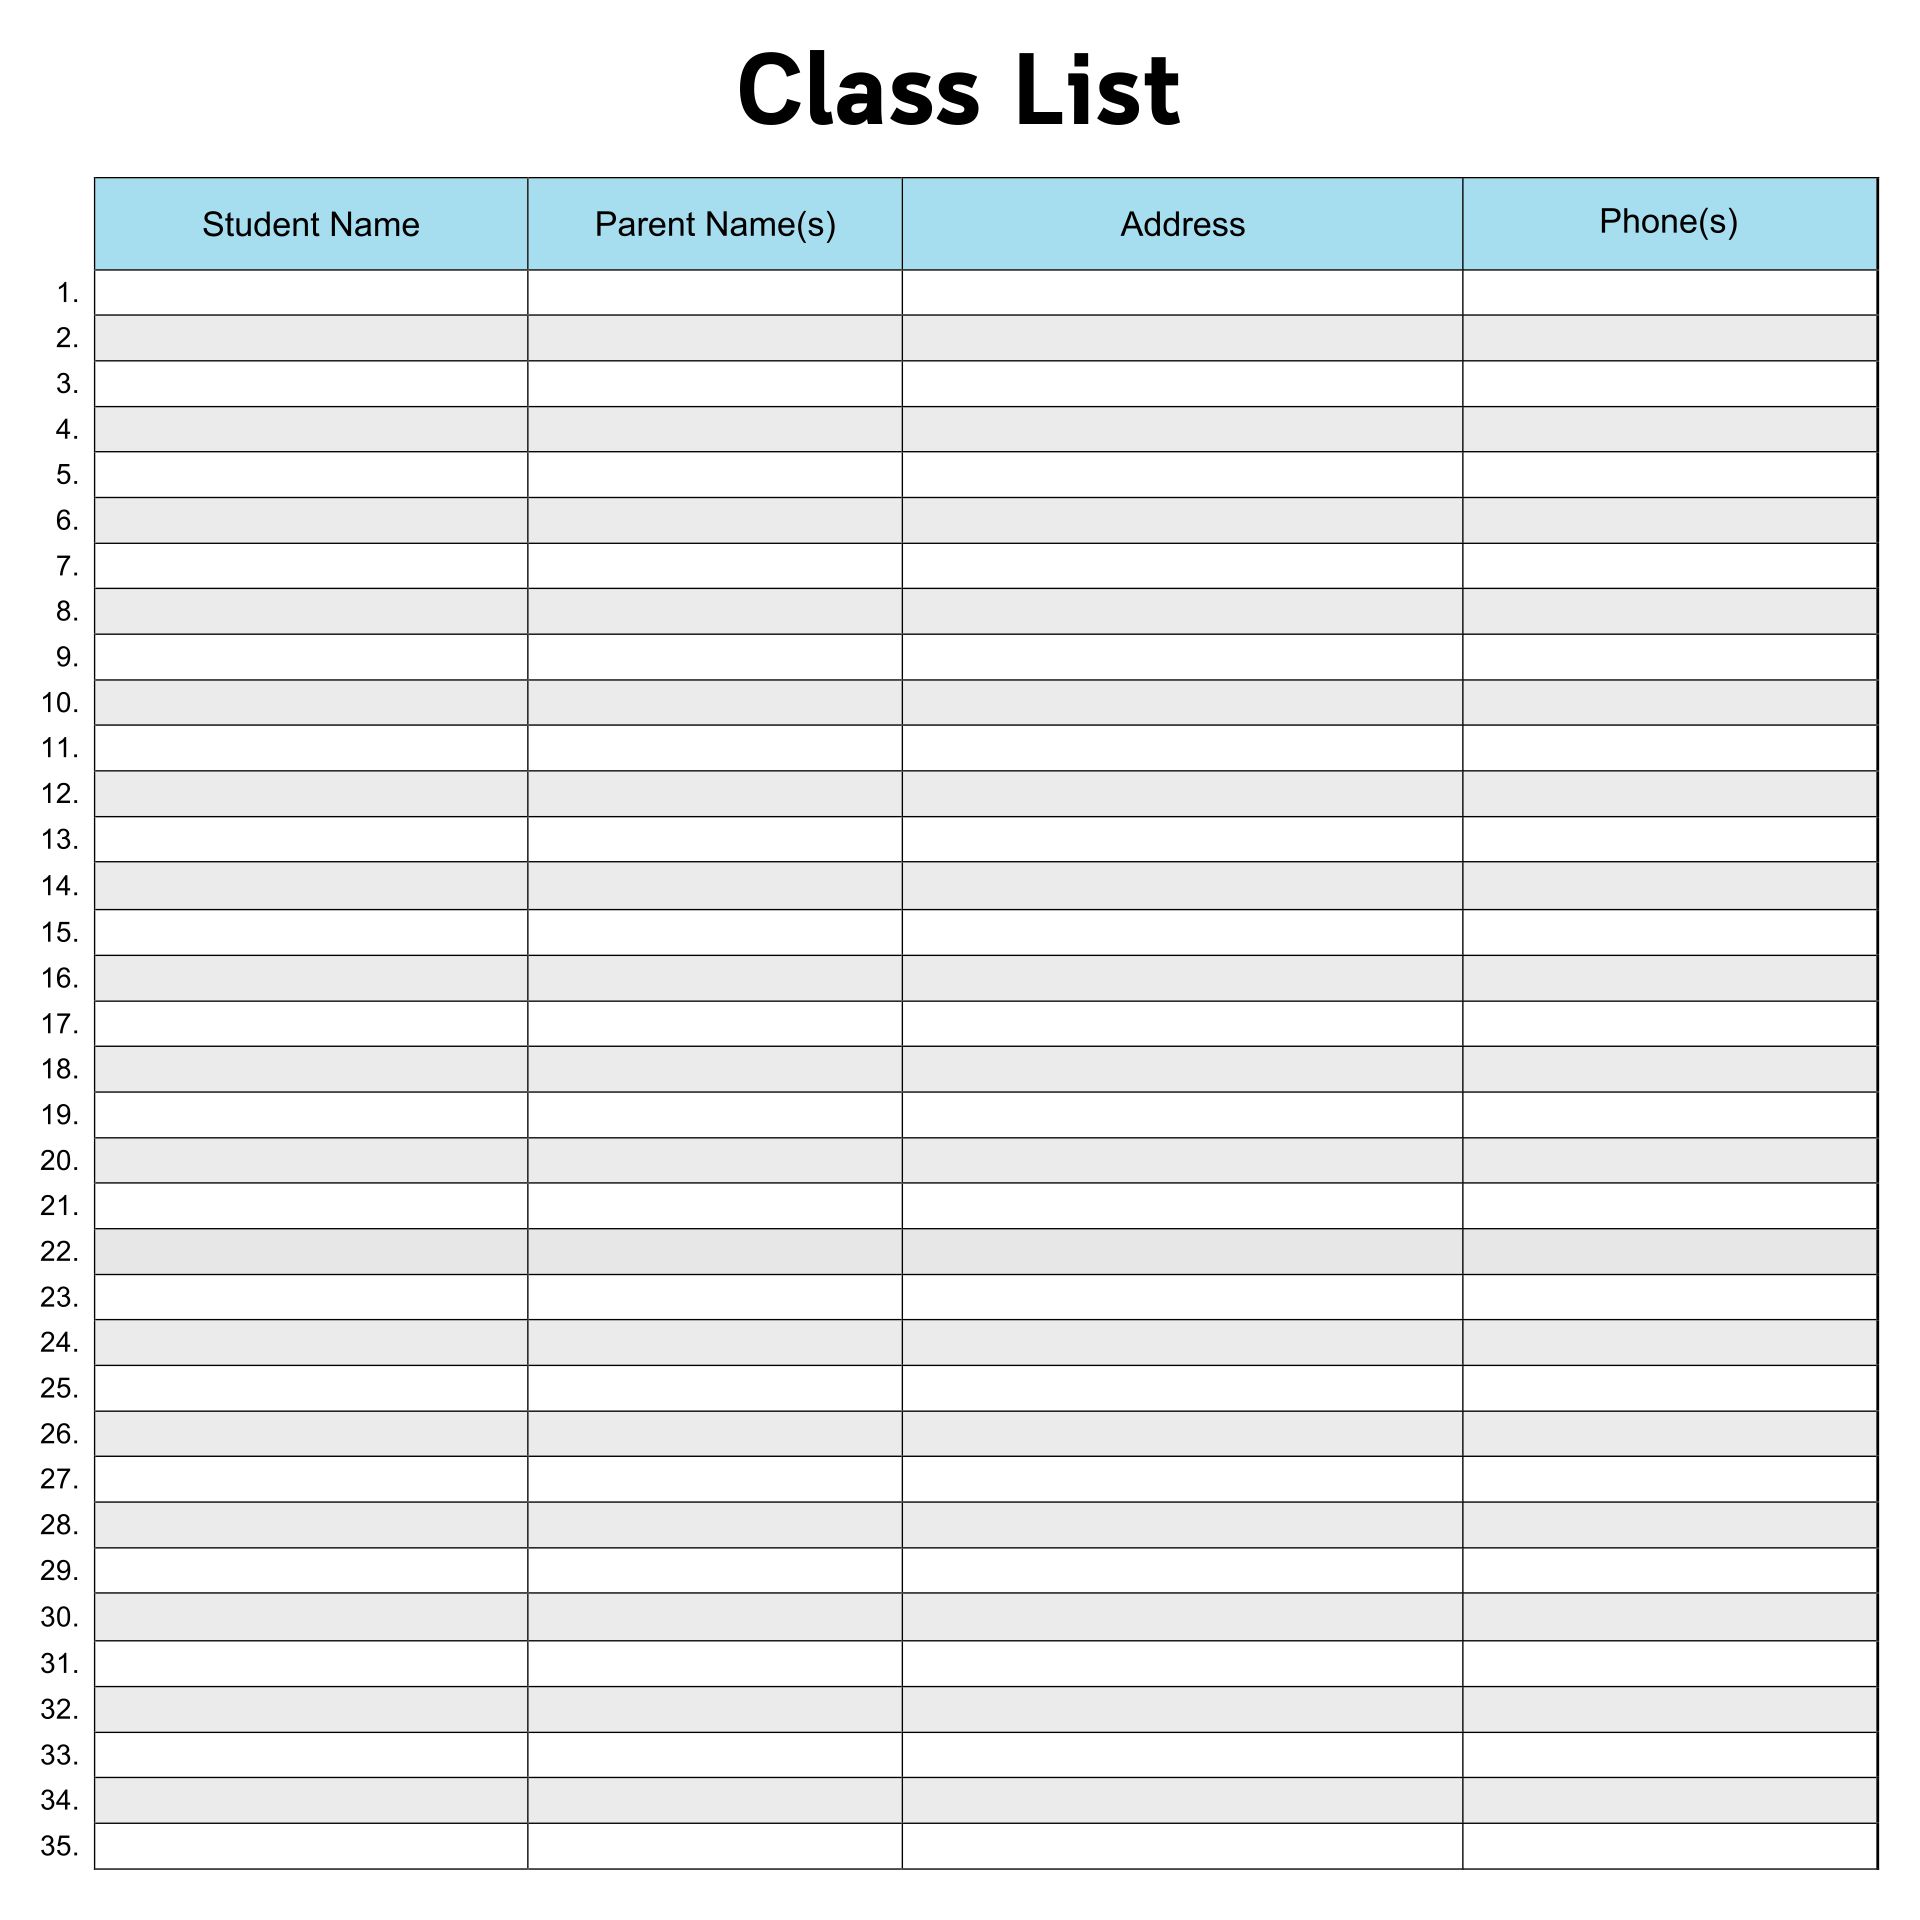 printable-class-roster-form-printable-forms-free-online